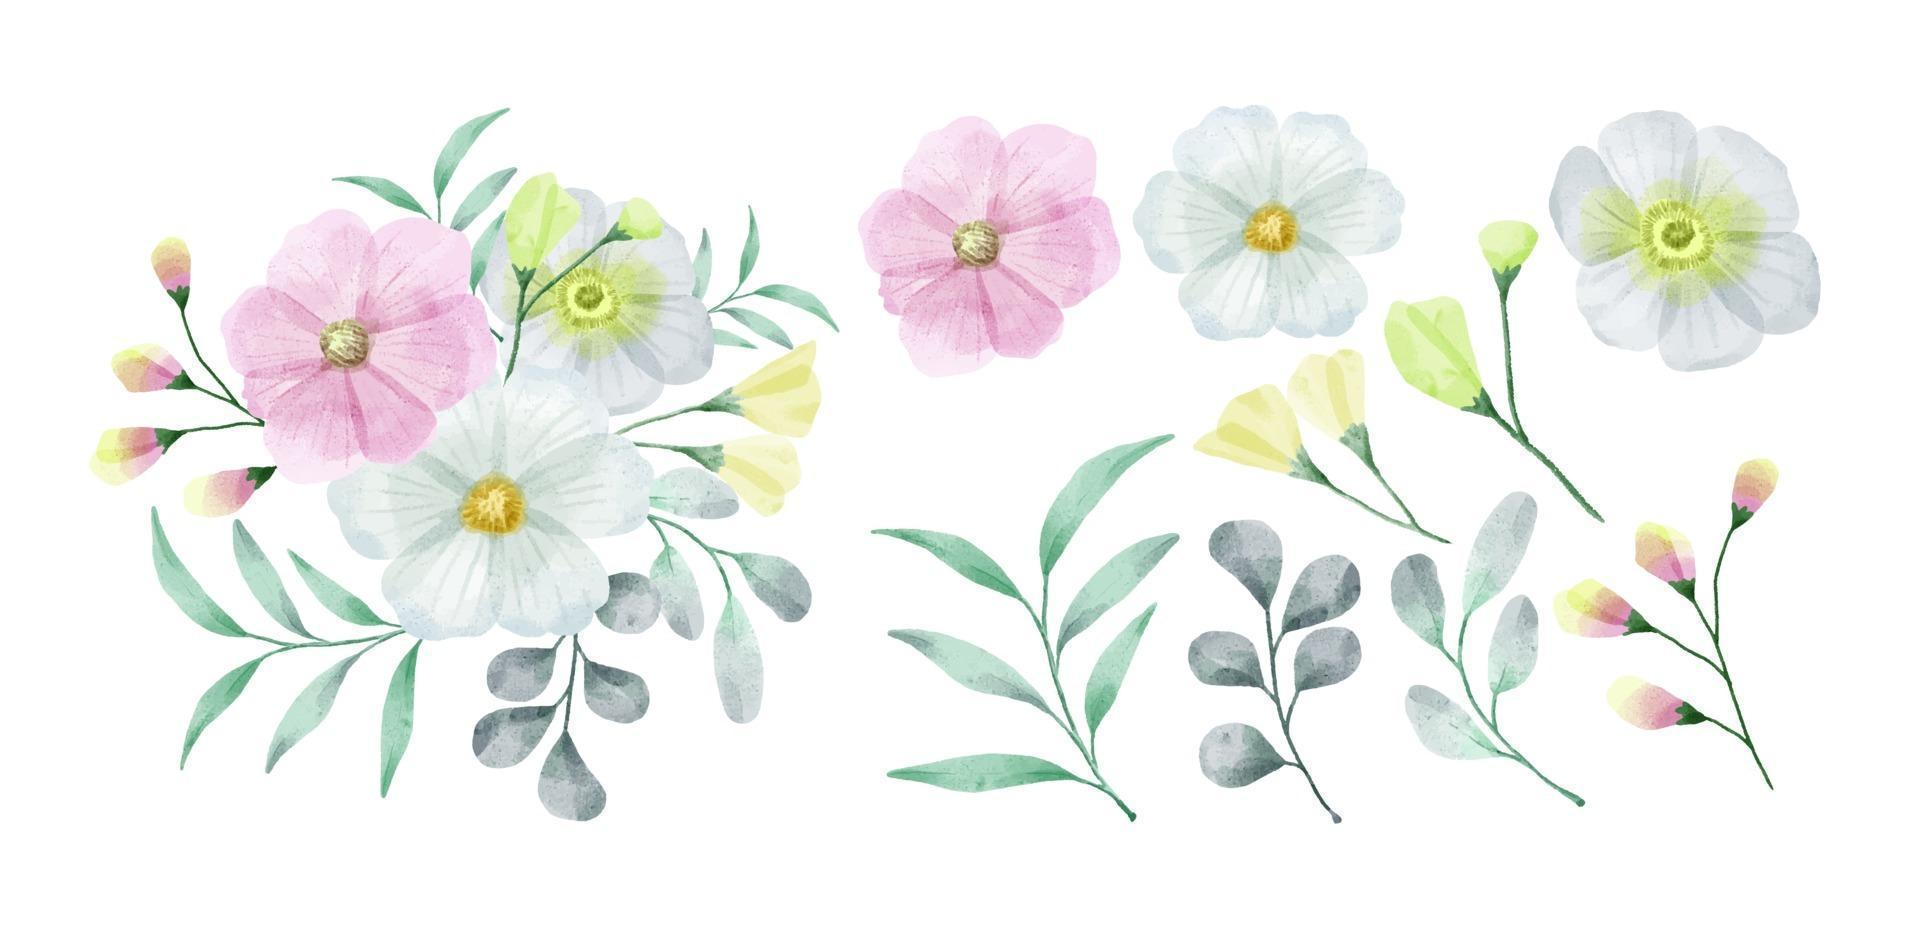 A set of flowers painted in watercolor vector